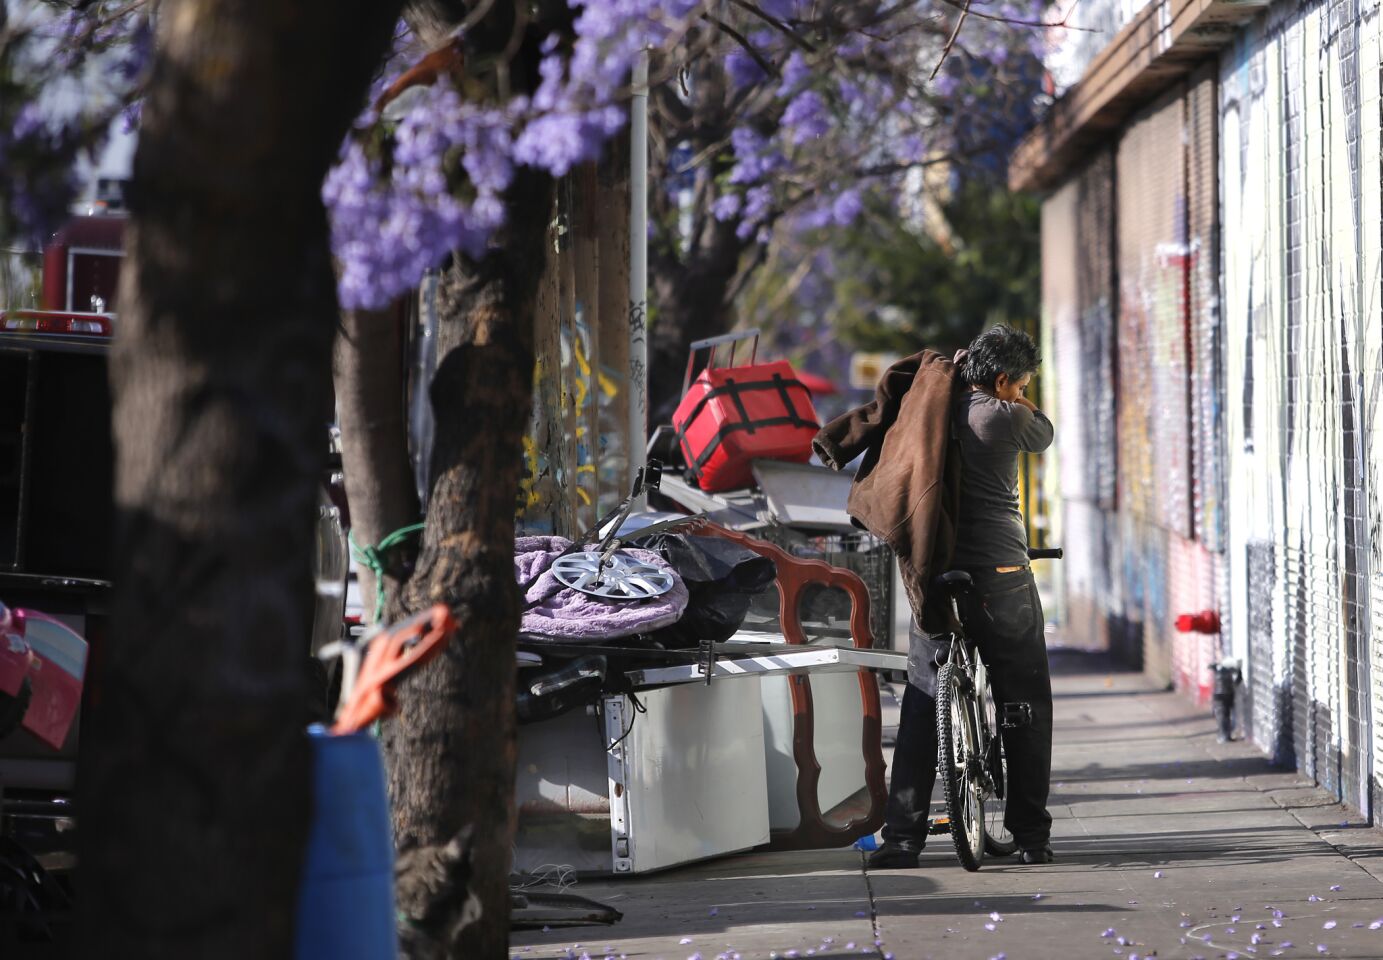 A homeless man secures his belongings before riding away on his bike in Los Angeles.